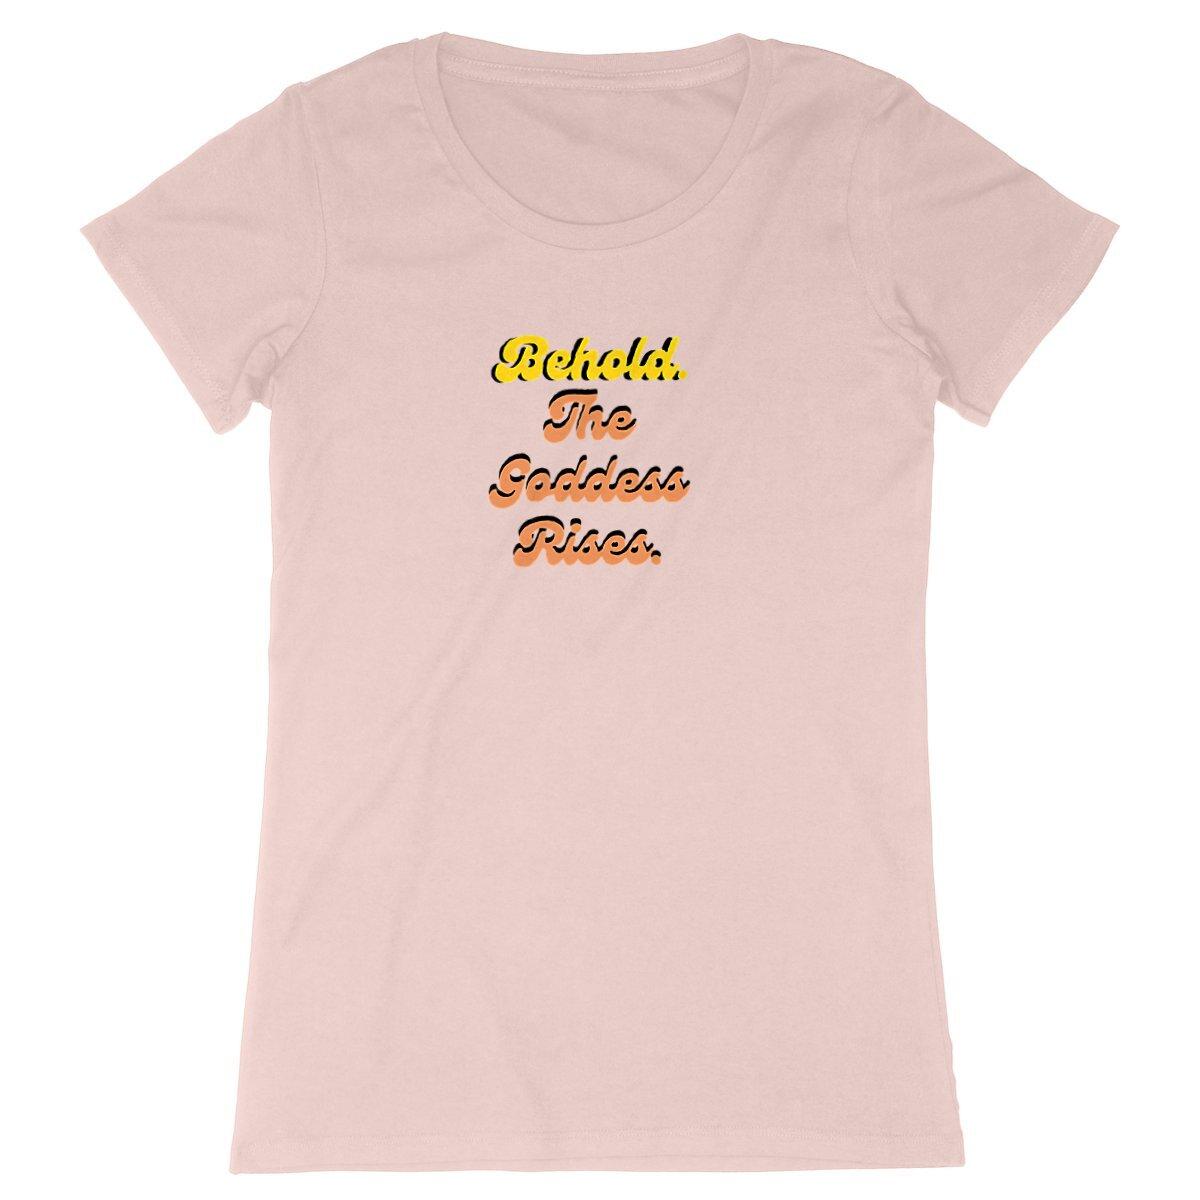 Goddess Rises Premium Plus 100% organic cotton woman's T-shirt, designed by Tree of Life Art, combines eco-friendly fashion with empowering design.